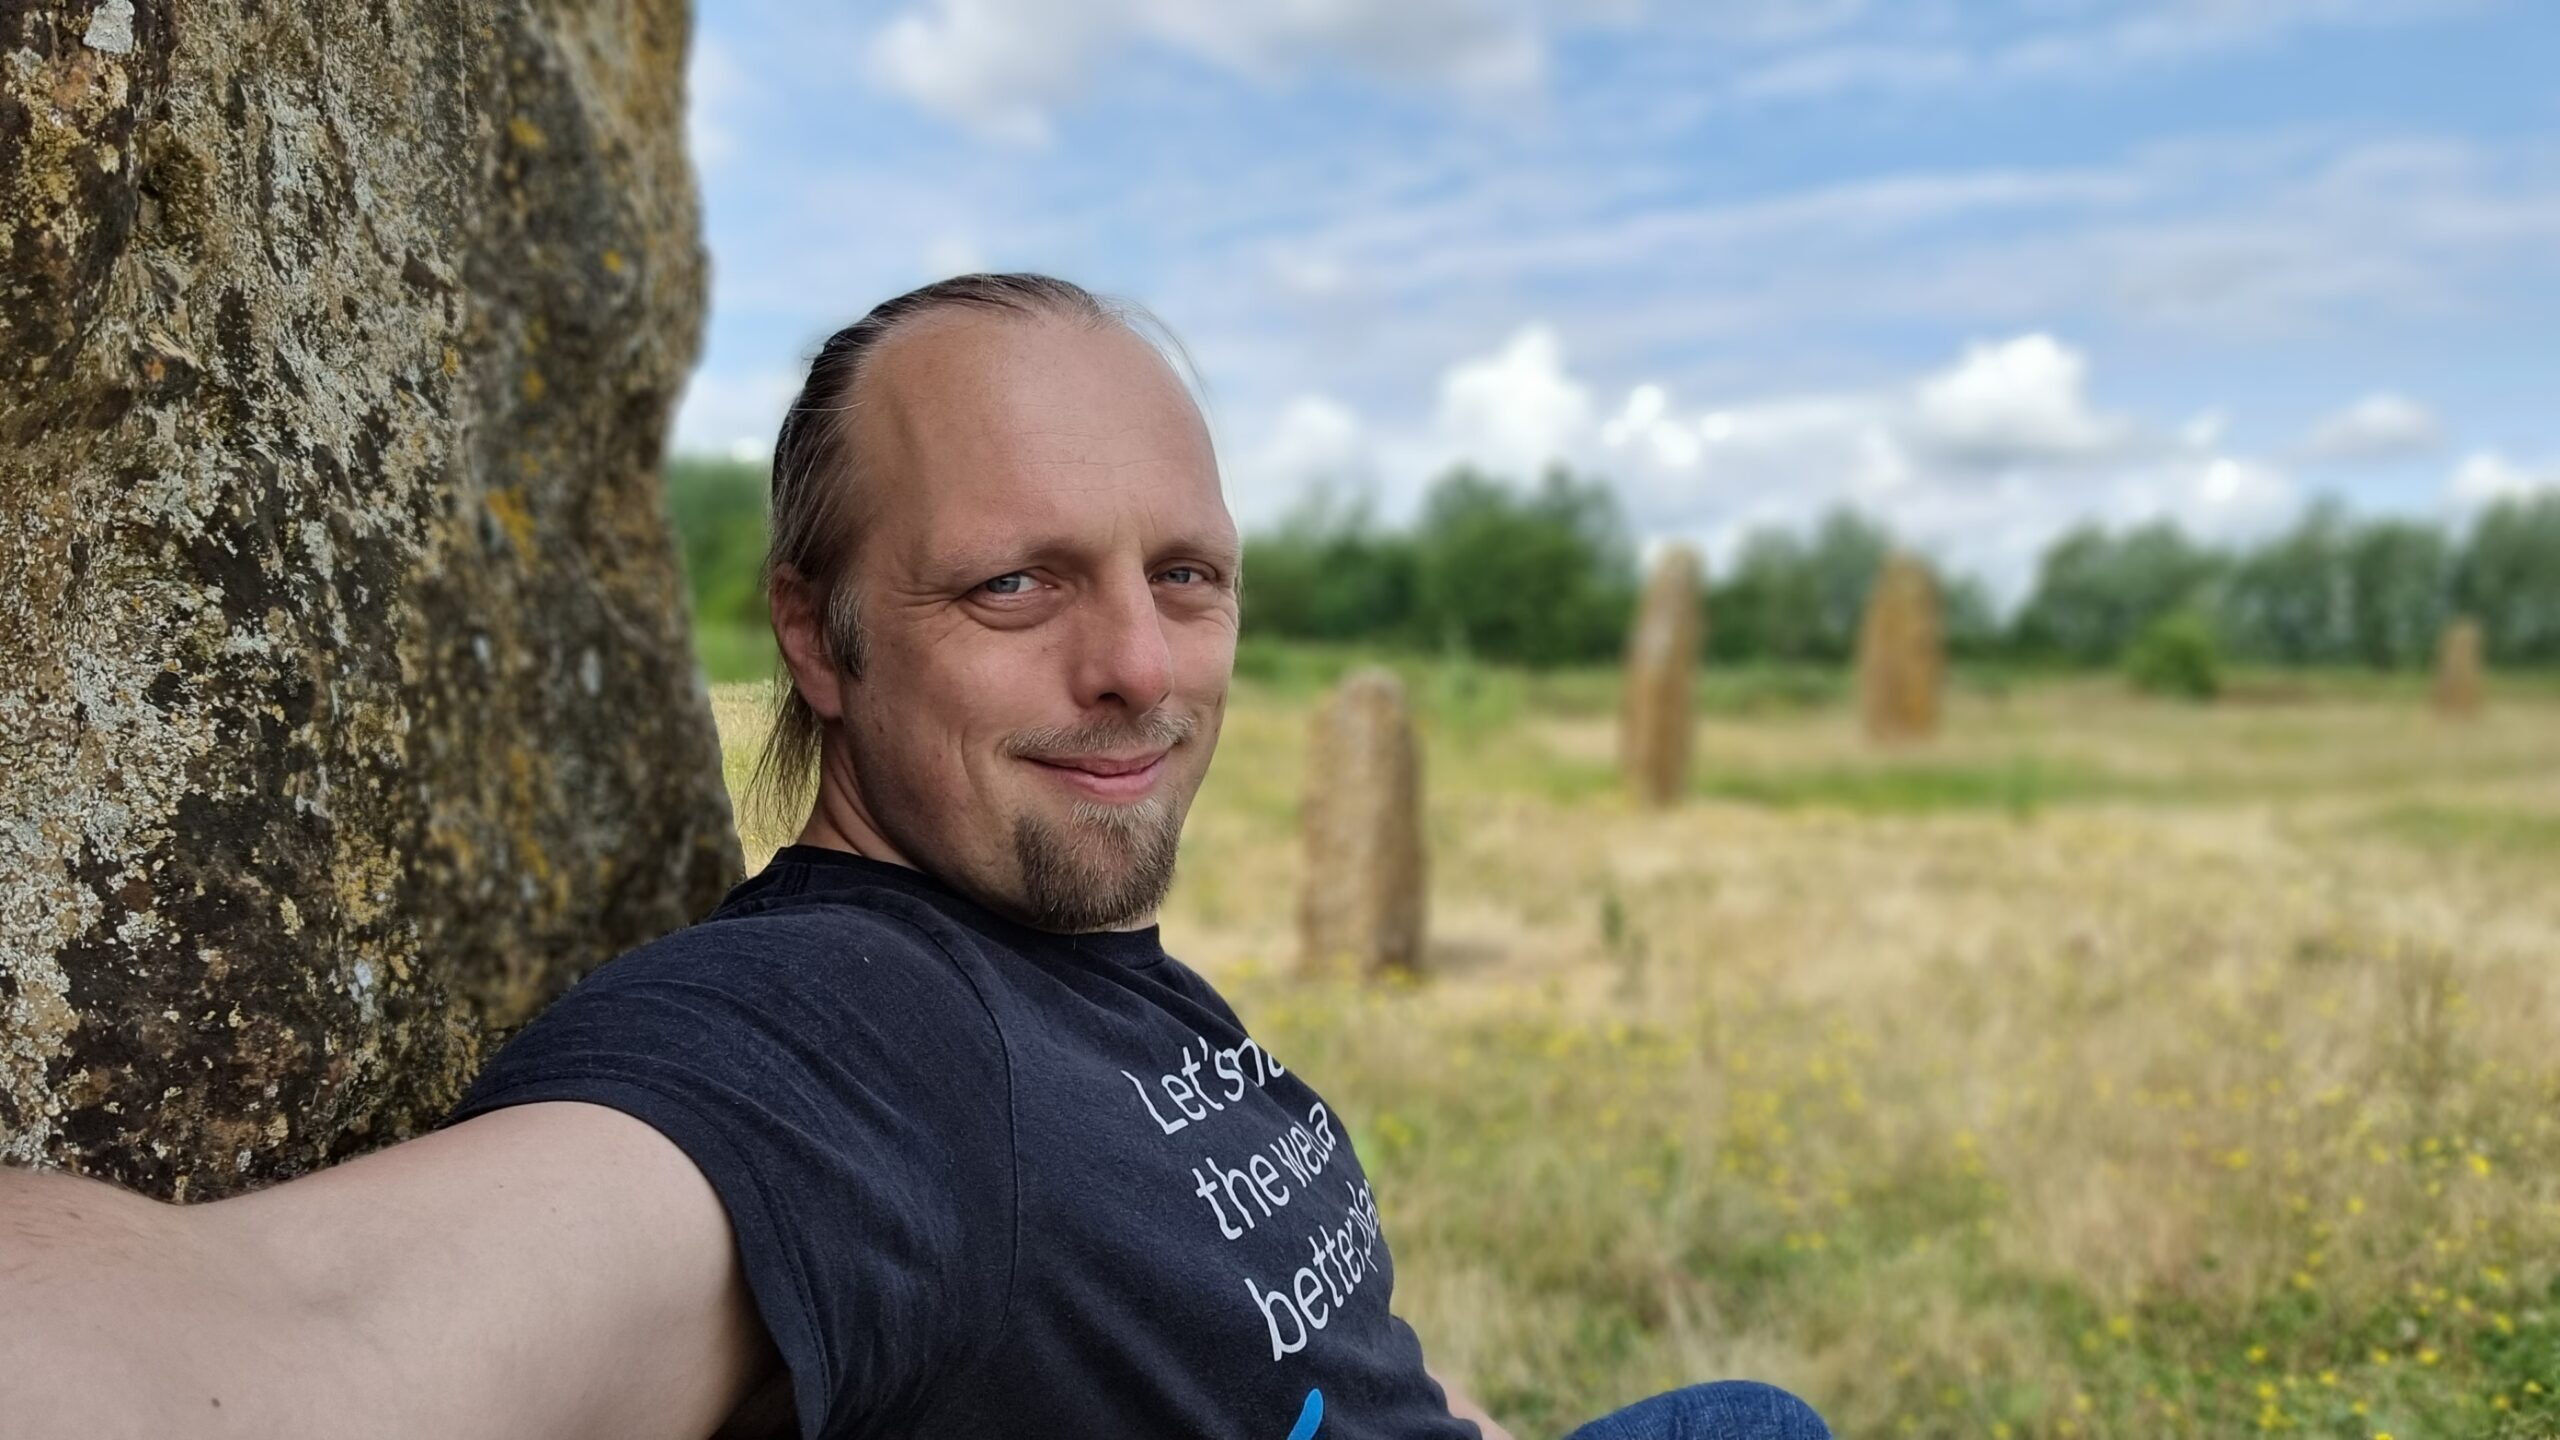 Dan, wearing a black t-shirt with the words "Let's make the web a better place" on, sitting with his back to a standing stone with megalithic remains in the background.